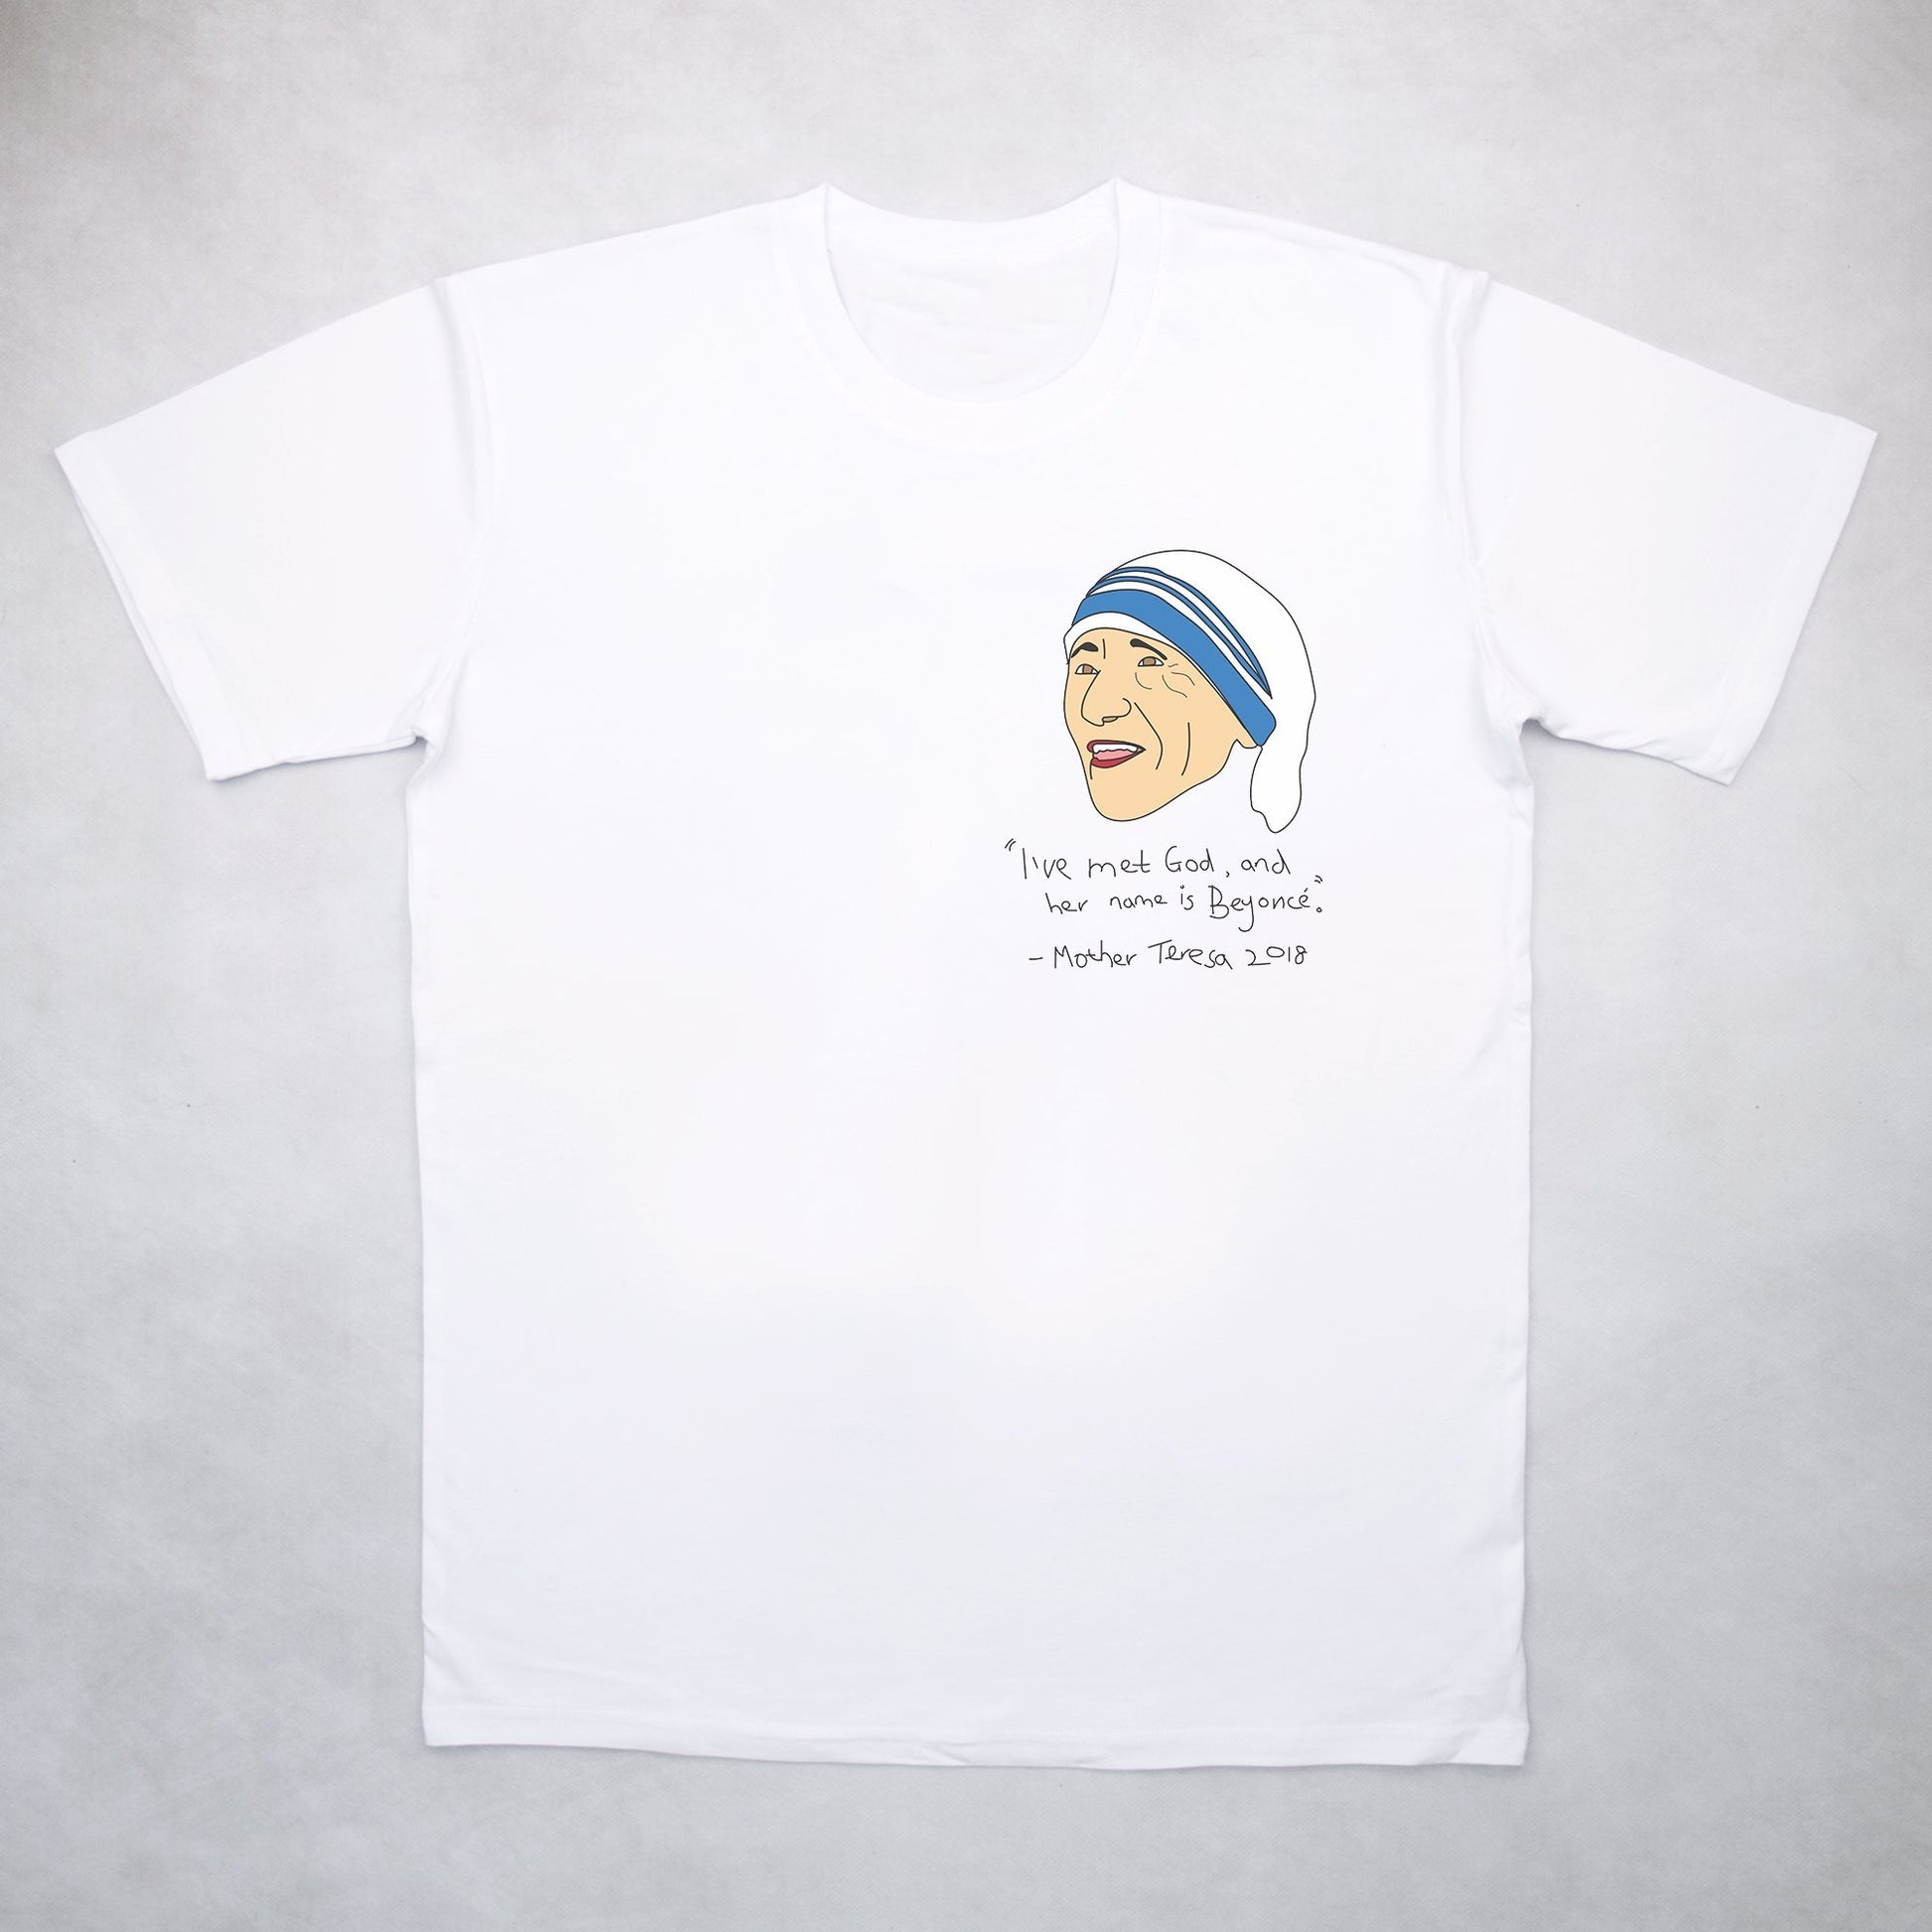 Classy Duds Short Sleeve T-Shirts S / White / Standard Modern Day Mother Teresa Tee